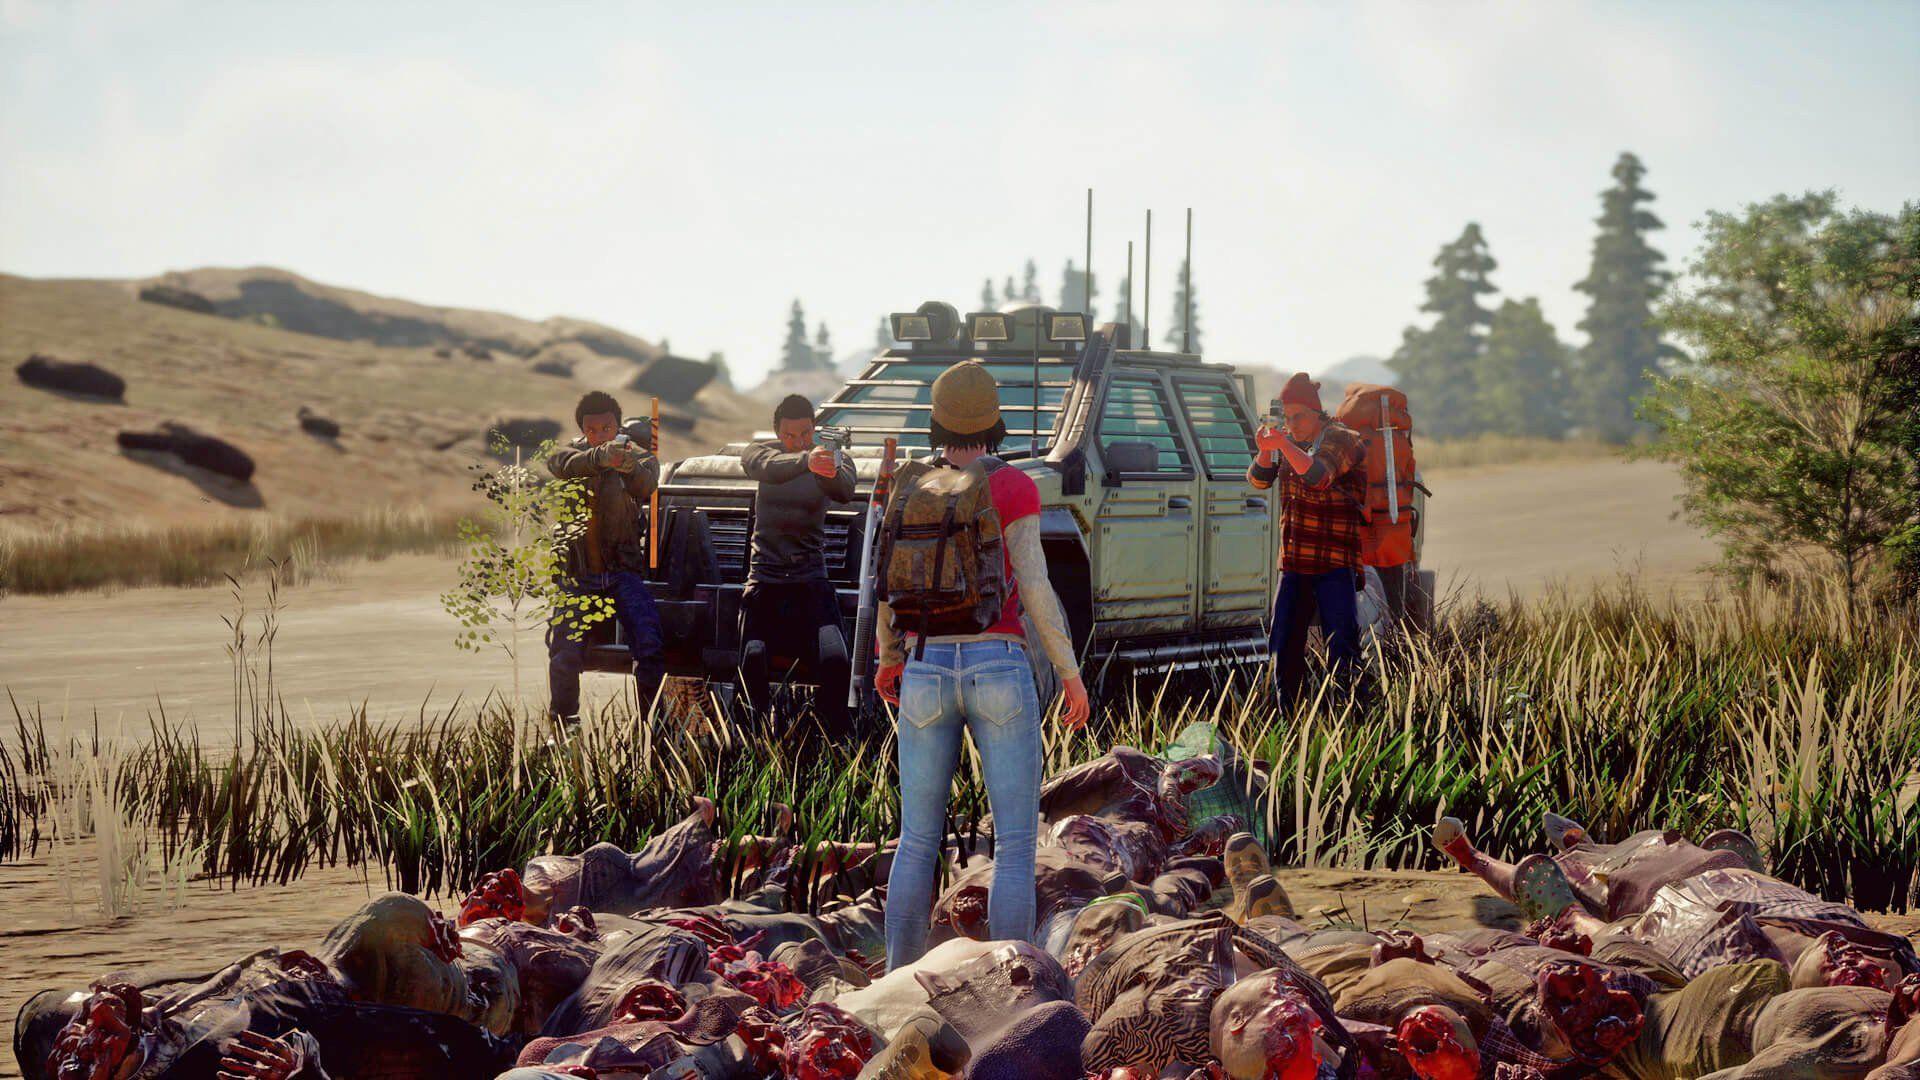 State of Decay 2 hits Xbox One and Windows 10 in May for $30.